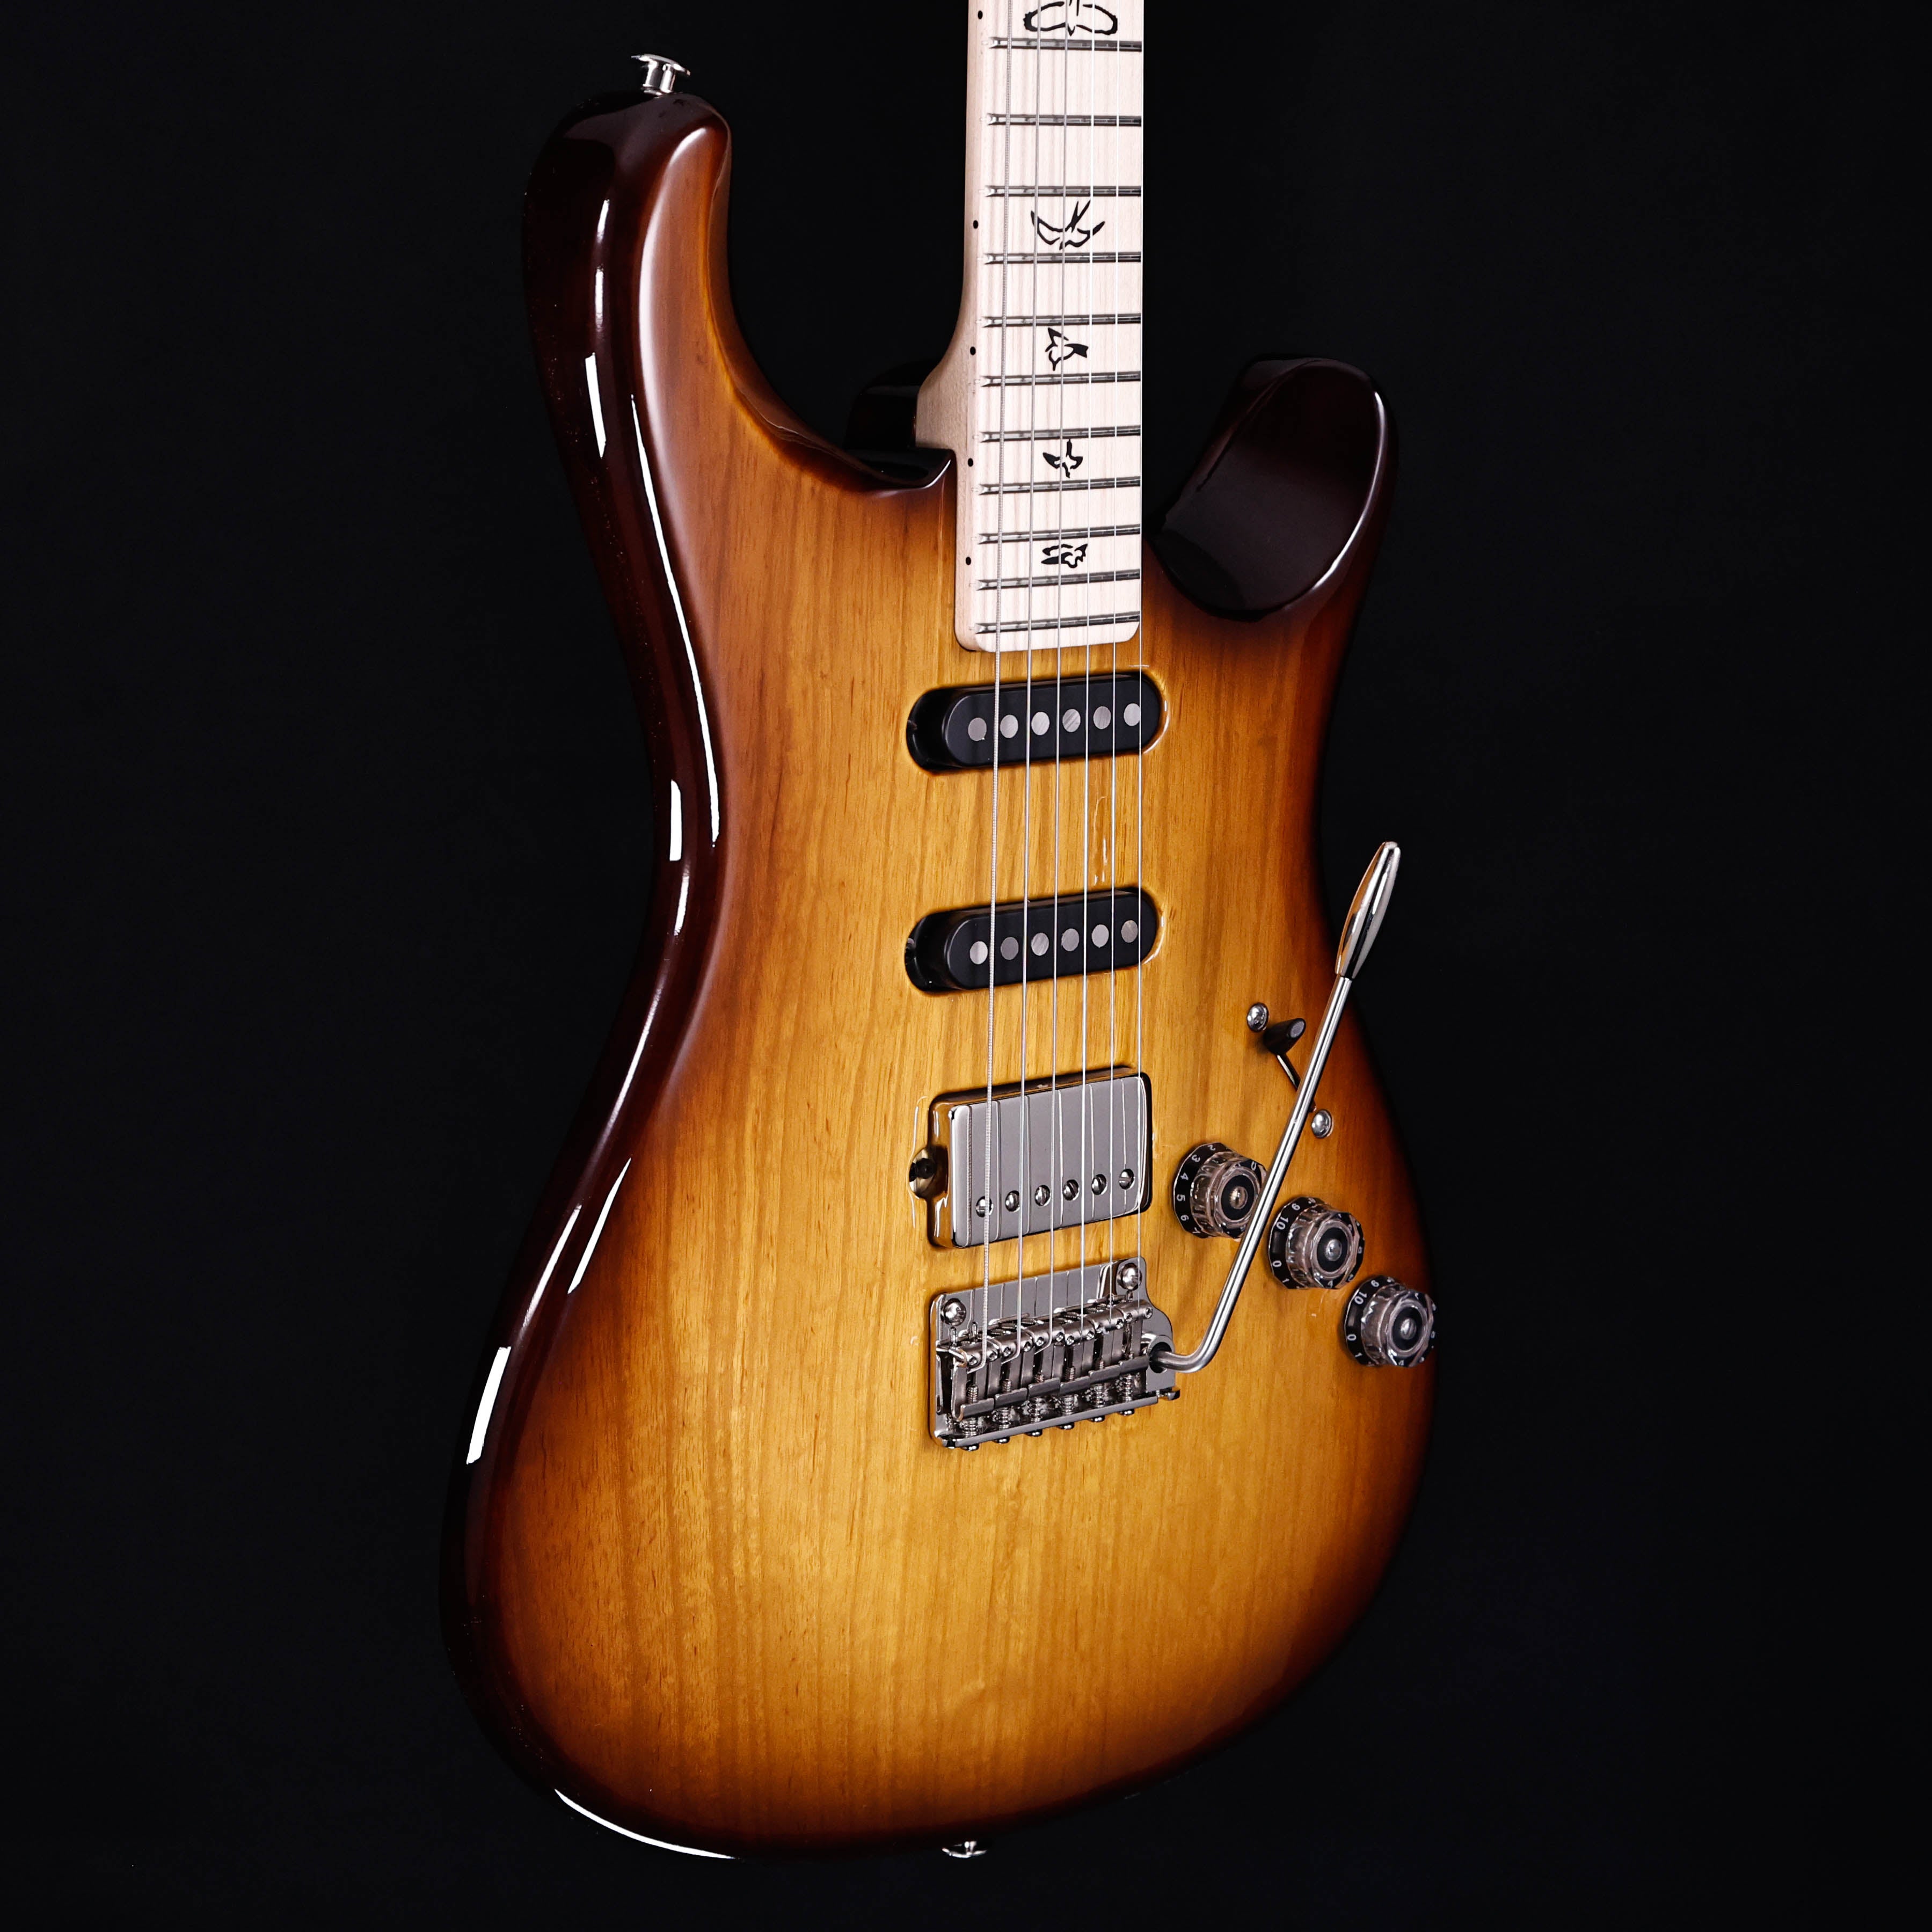 PRS Paul Reed Smith Fiore Solidbody Electric, Sunflower 7lbs 3.1oz